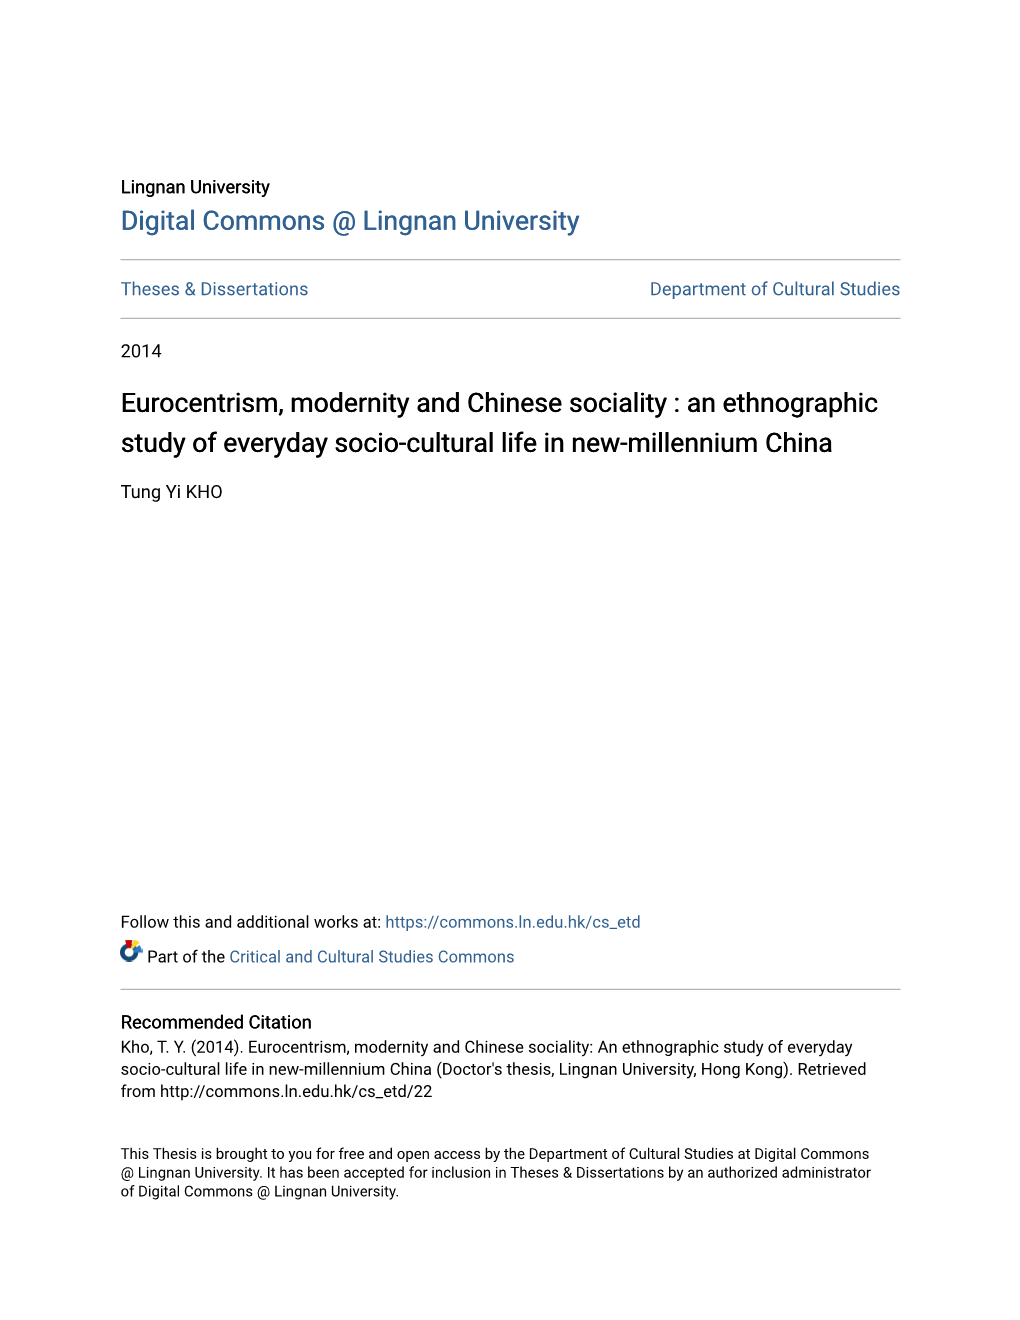 Eurocentrism, Modernity and Chinese Sociality : an Ethnographic Study of Everyday Socio-Cultural Life in New-Millennium China